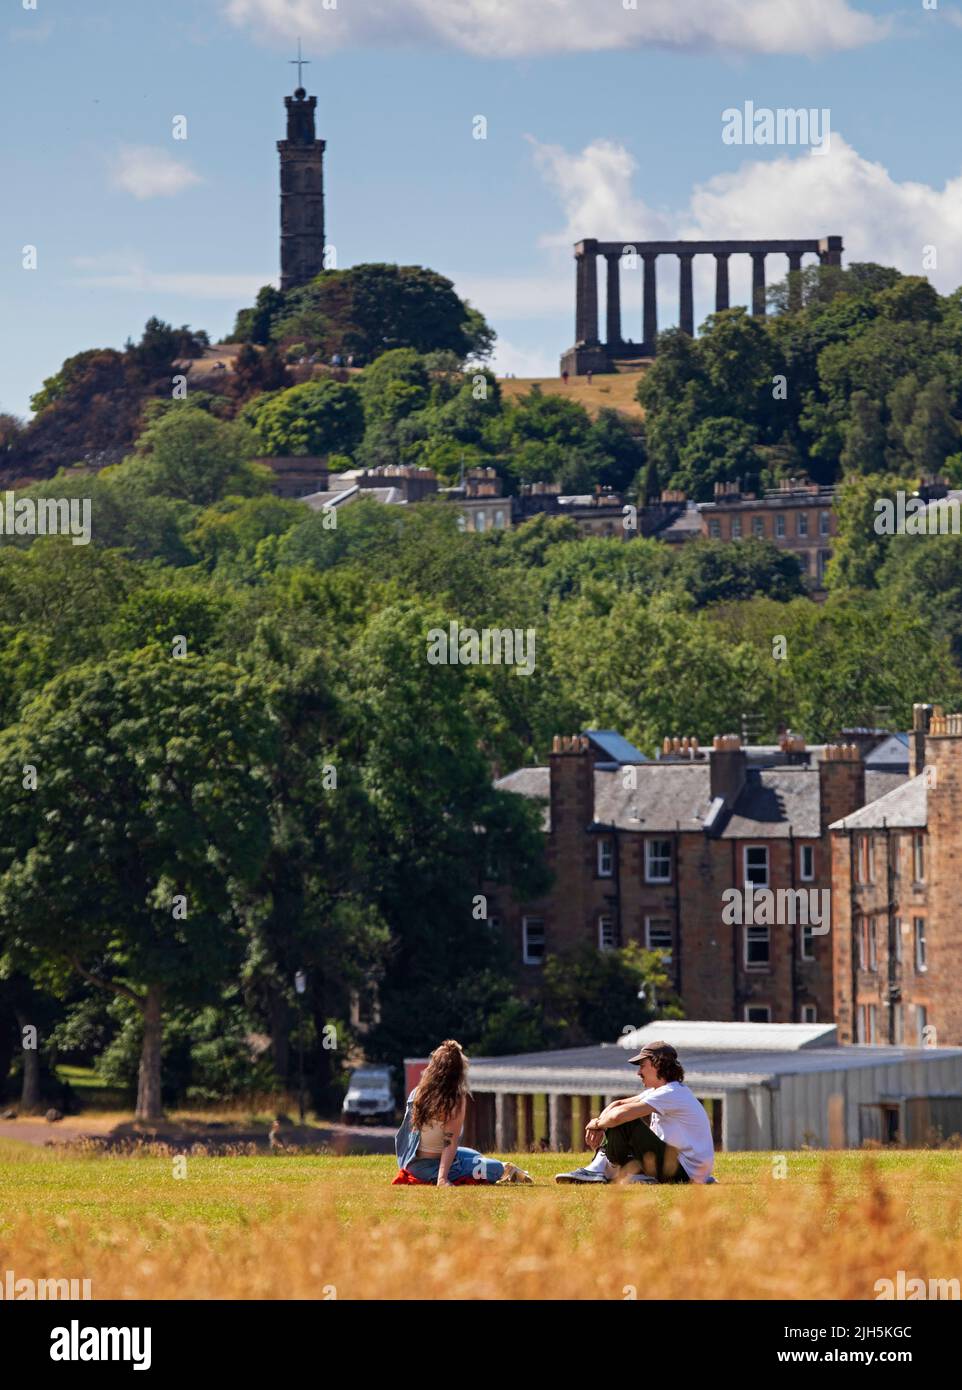 Holyrood Park, Edinburgh, Scotland, UK. 15th July 2022. People enjoy the summer in the city with temperature of 21 degrees centigrade in the scenic surroundings of historic Holyrood Park in the city centre below Arthur's Seat. Pictured: A young couple relax by sitting on the grass chatting with the architecture of the Calton Hill in the background. Credit: Scottishcreative/alamy live news. Stock Photo